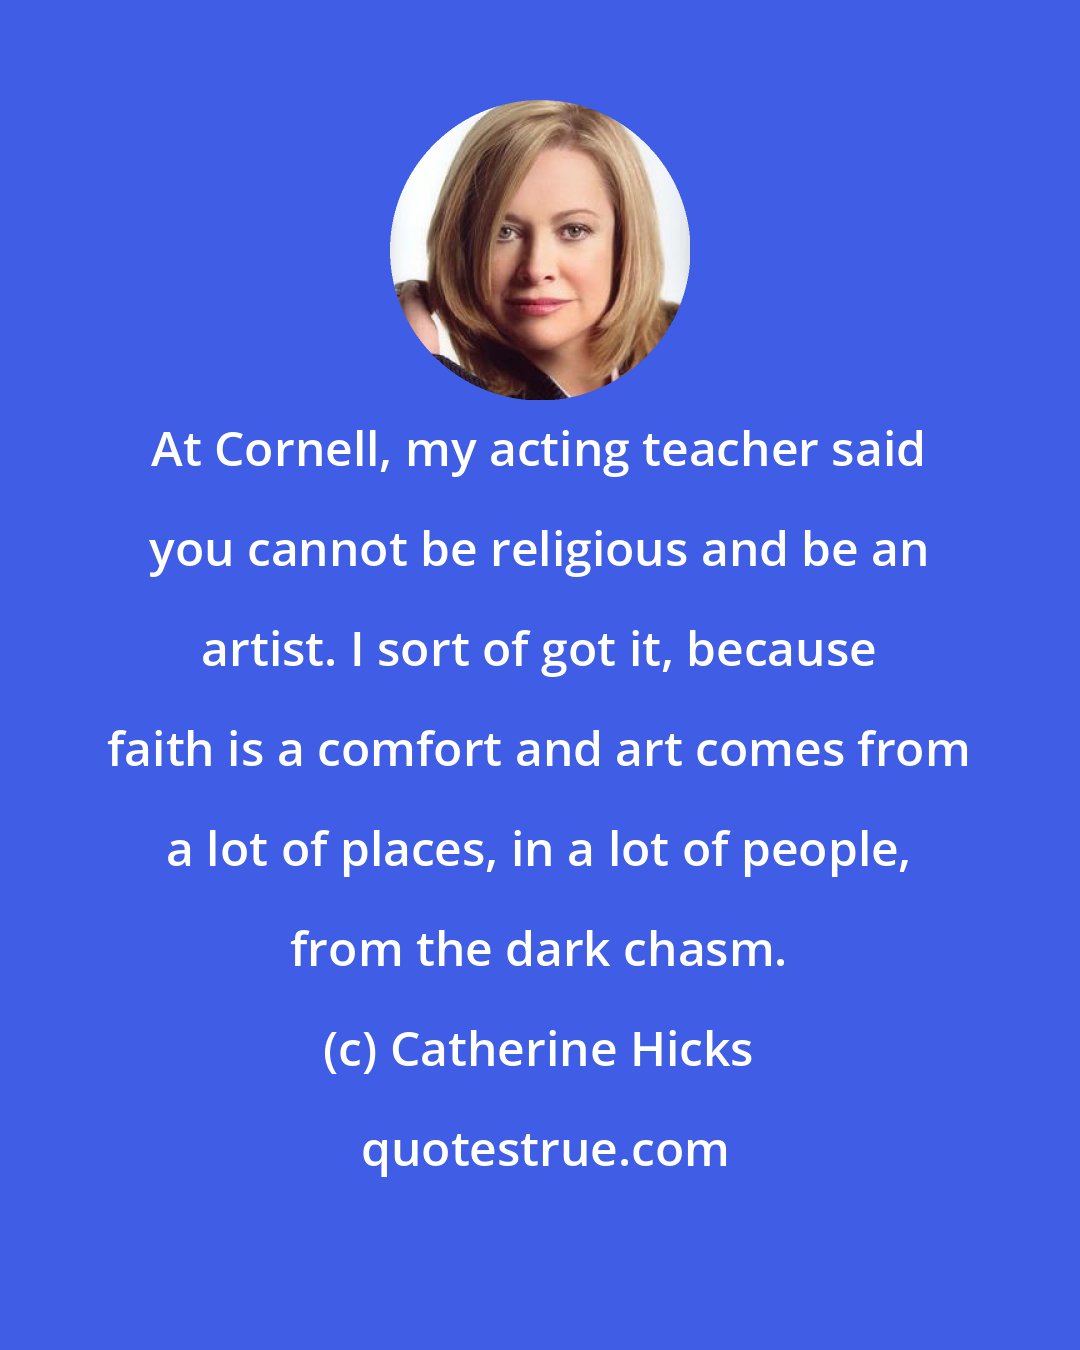 Catherine Hicks: At Cornell, my acting teacher said you cannot be religious and be an artist. I sort of got it, because faith is a comfort and art comes from a lot of places, in a lot of people, from the dark chasm.